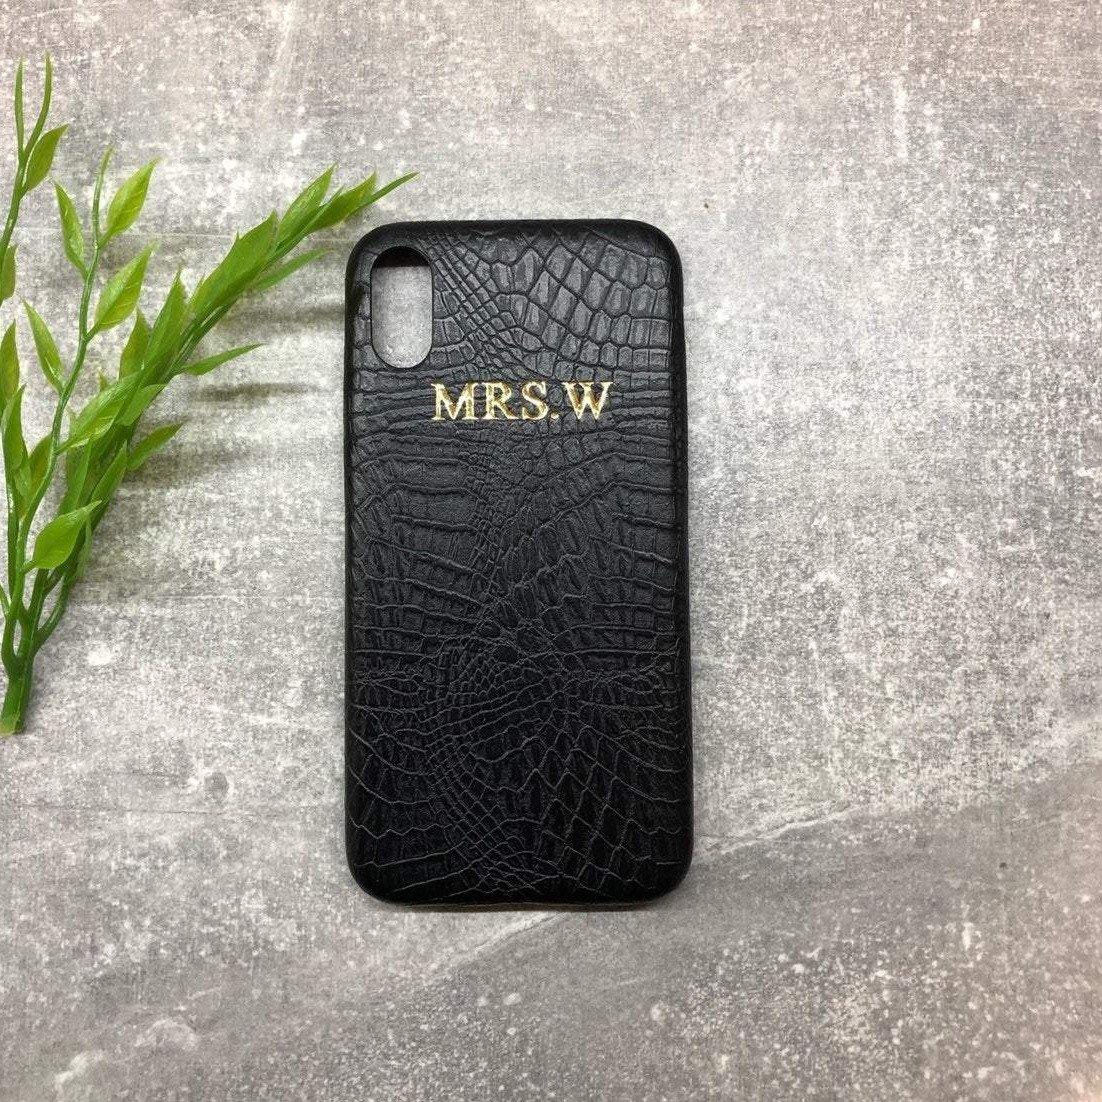 iPhone X/XS PU leather croc skin style case personalised with name or initials - PersonalisebyLisa